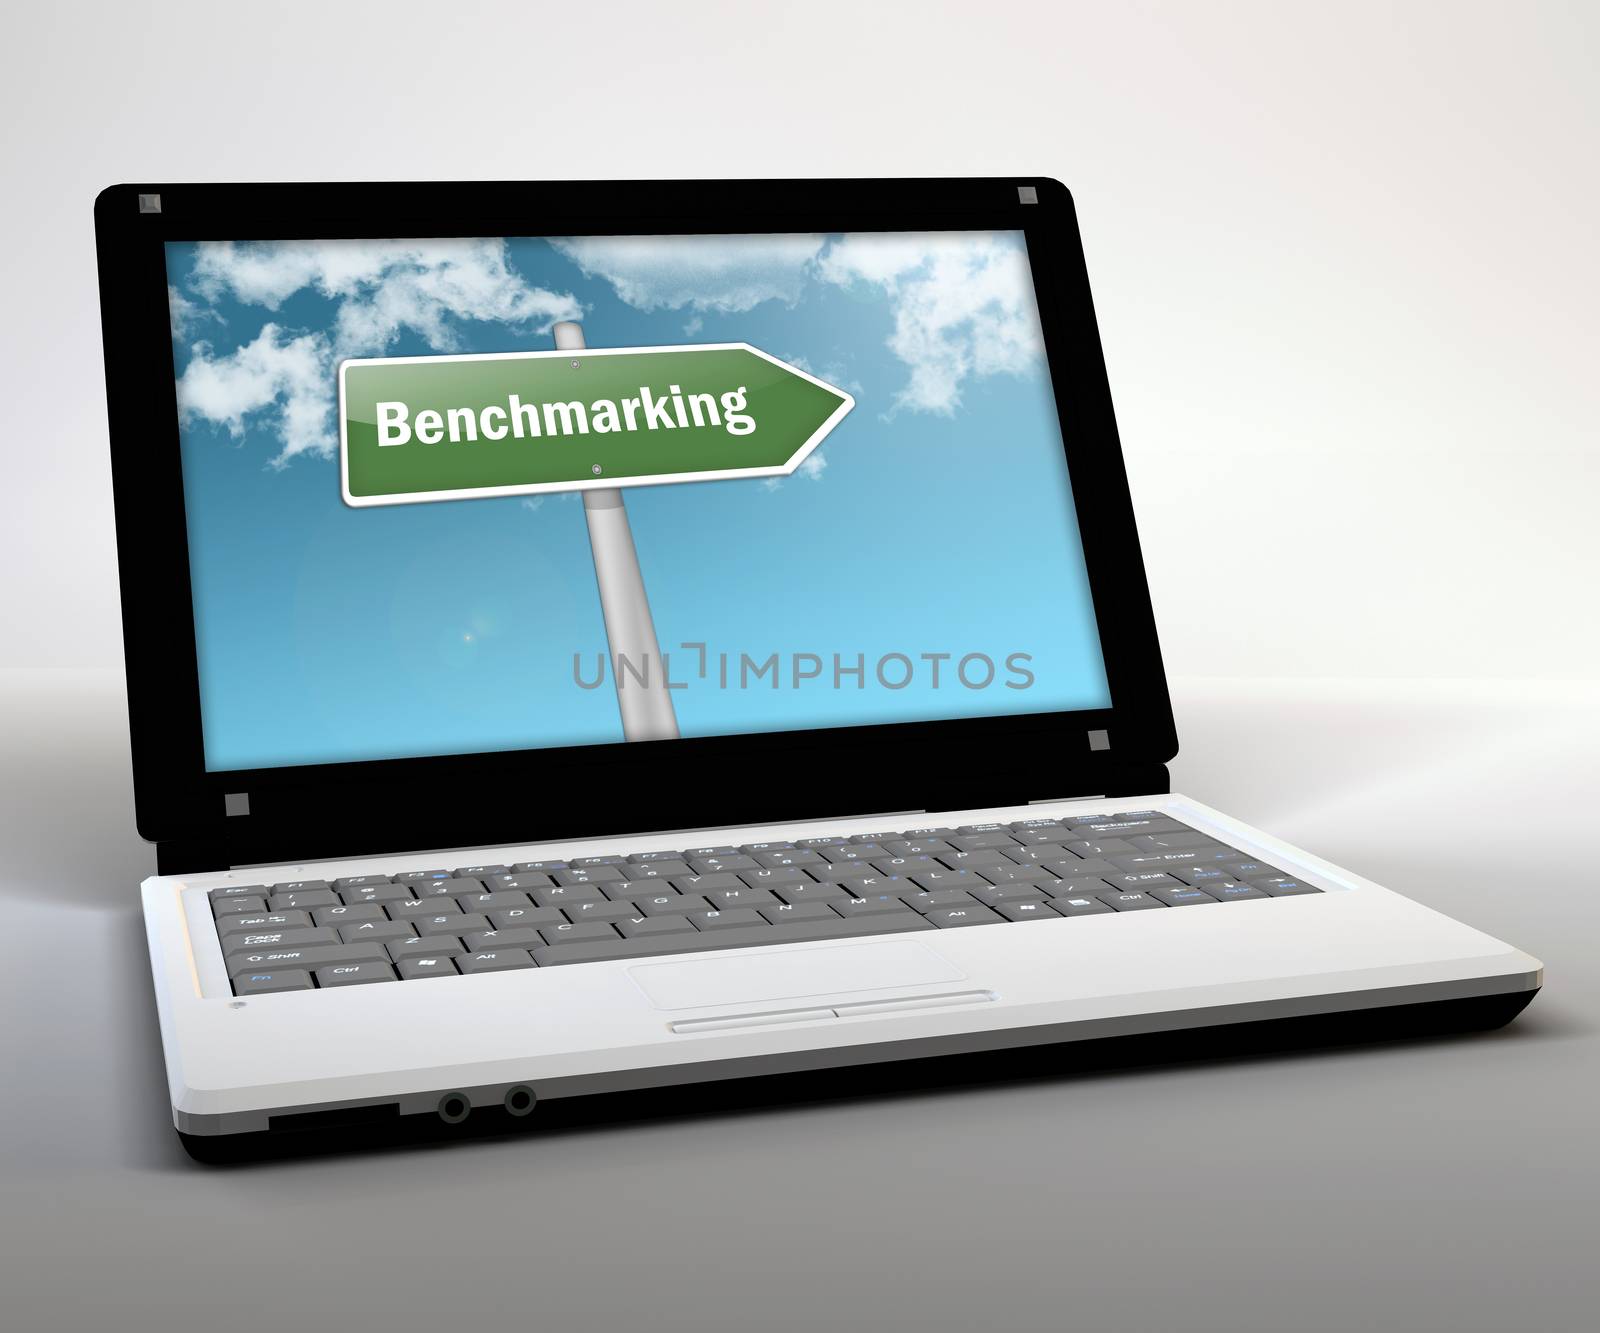 Mobile Thin Client "Benchmarking"